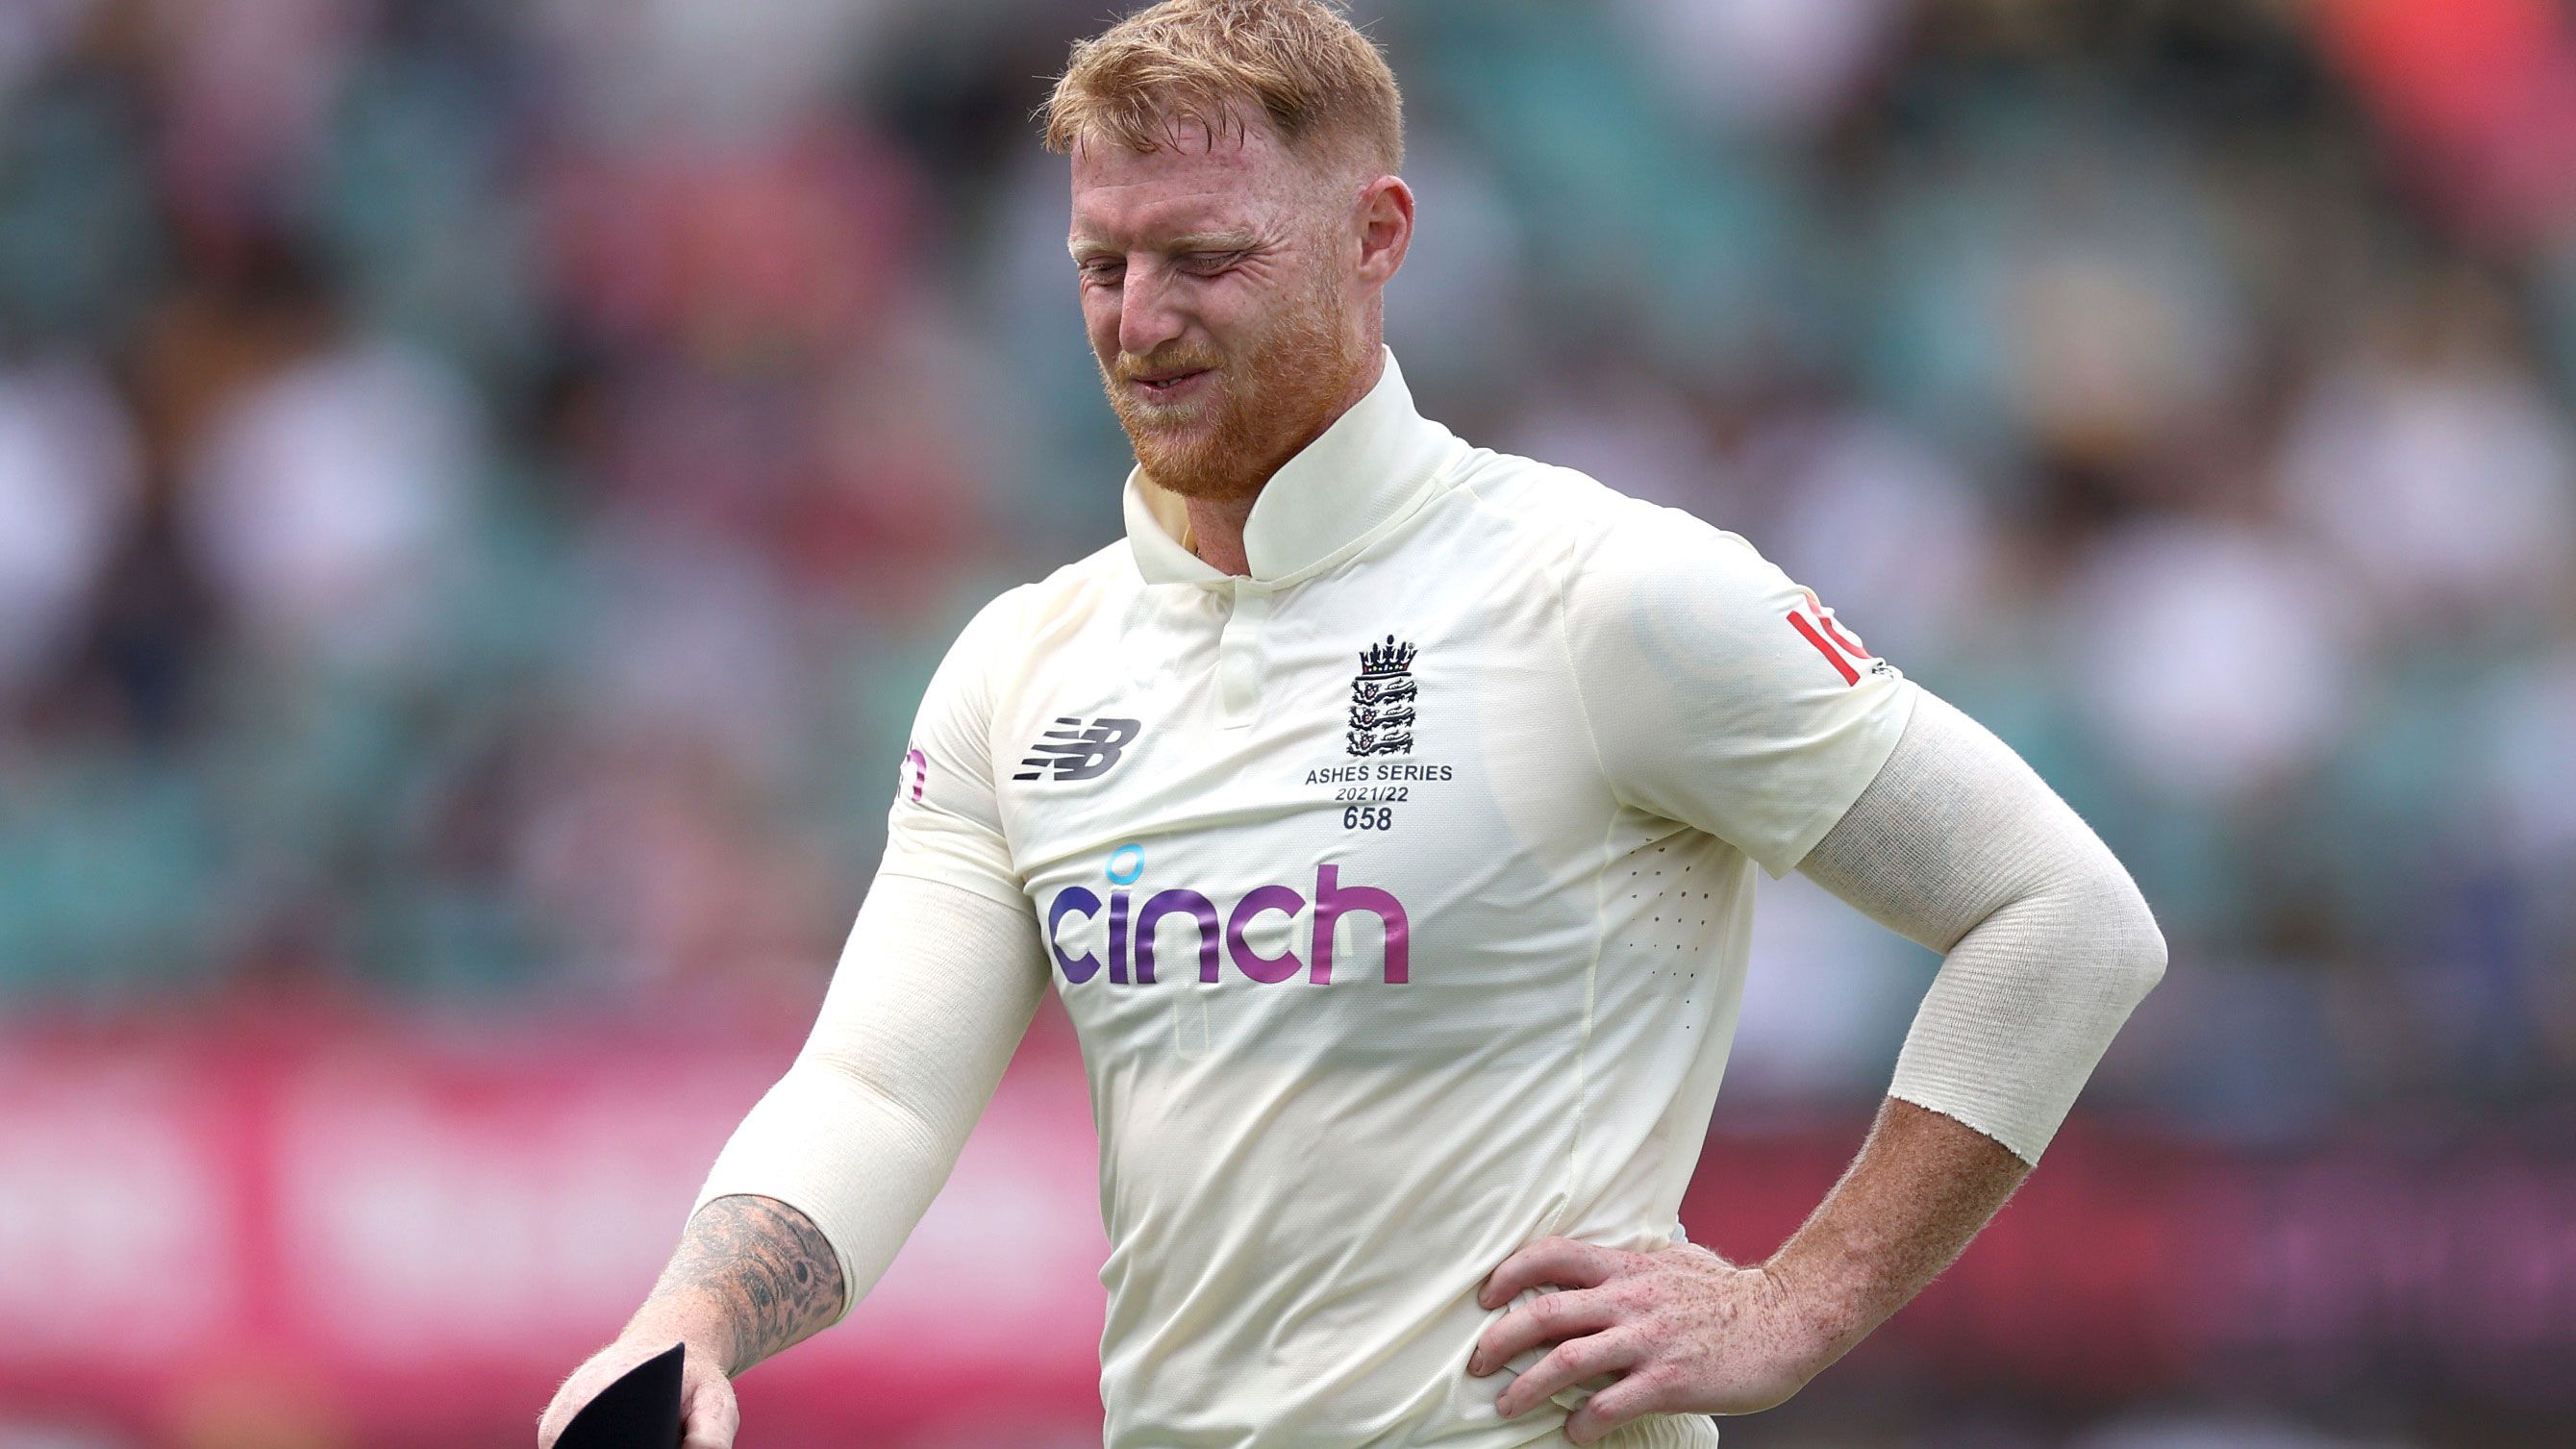 England captain Ben Stokes eases injury worry, plans to bowl in Ashes